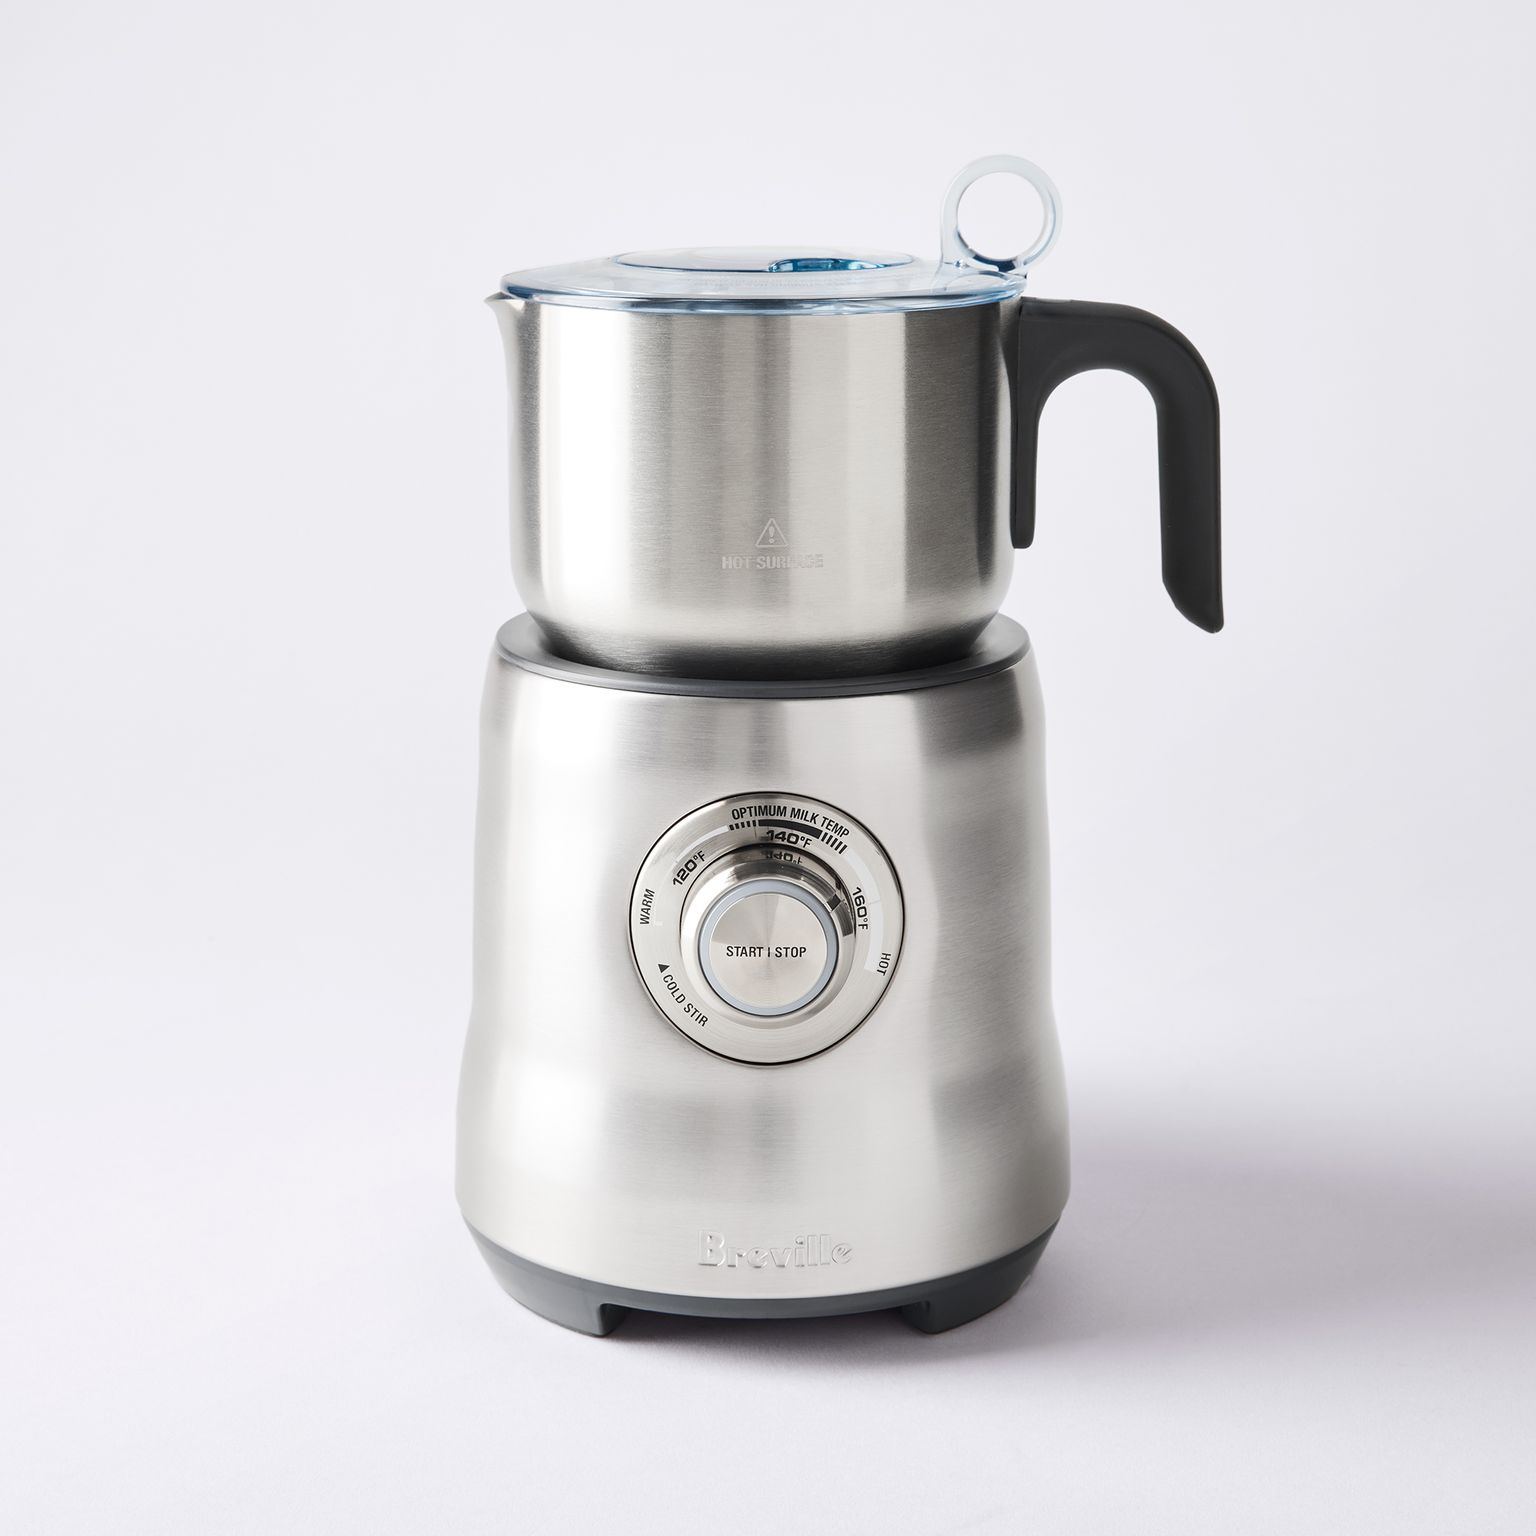 Breville Milk Cafe Stainless Steel Milk Frother + Reviews